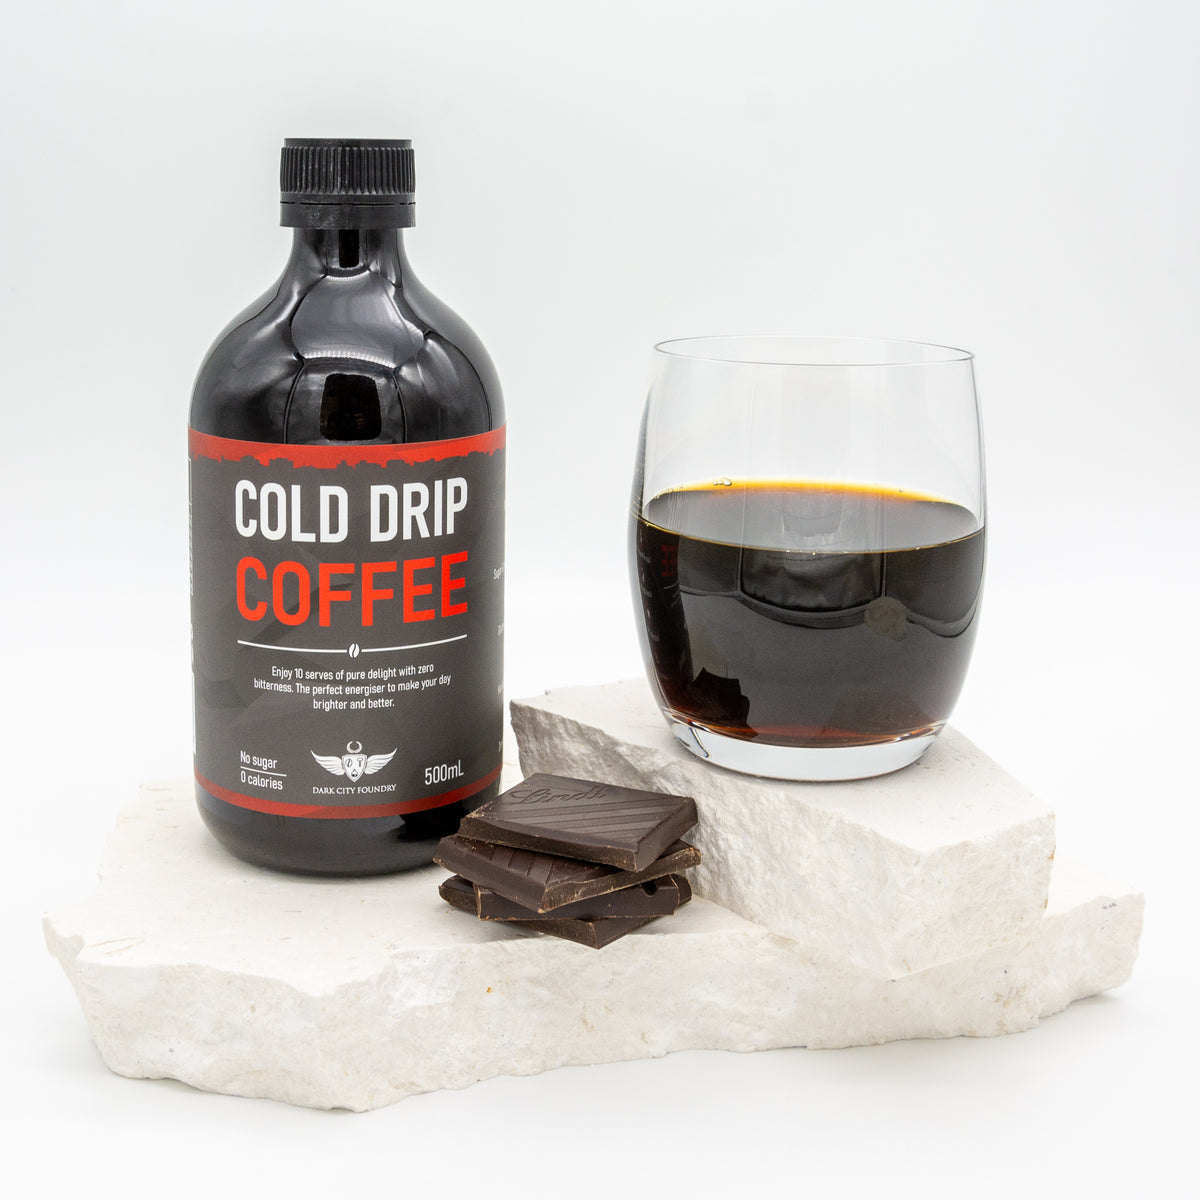 bottle of cold drip coffee pictured with a glass of coffee next to it and a few pieces of chocolate